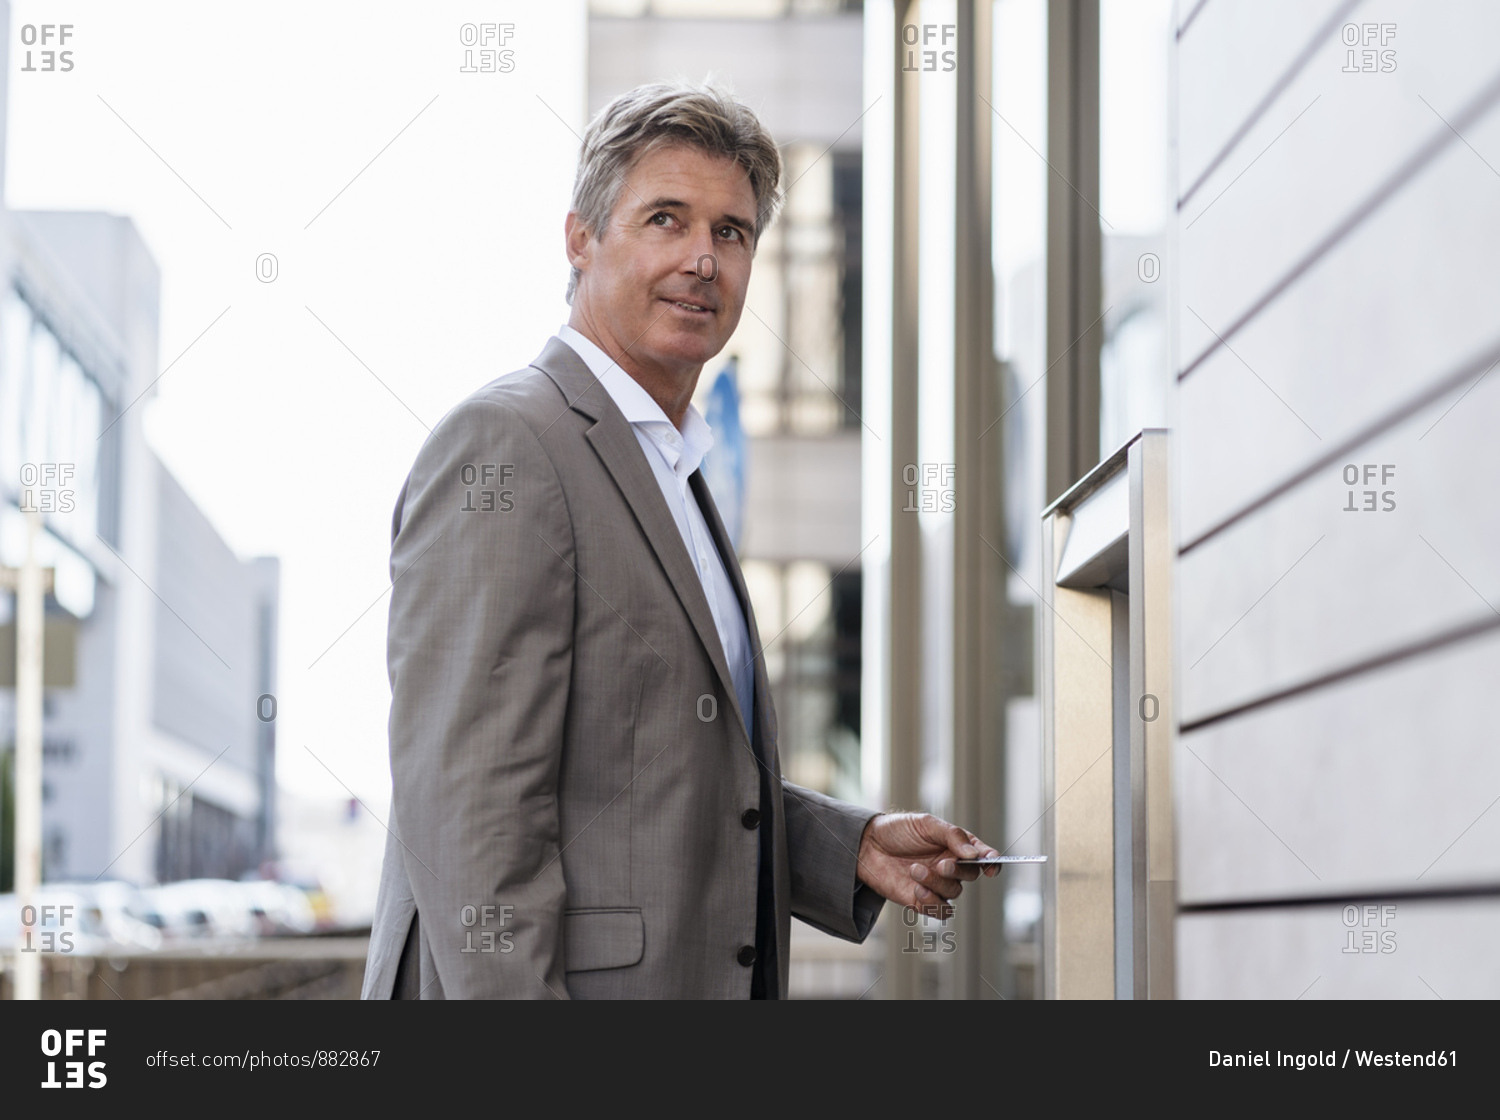 Mature businessman withdrawing money at an ATM